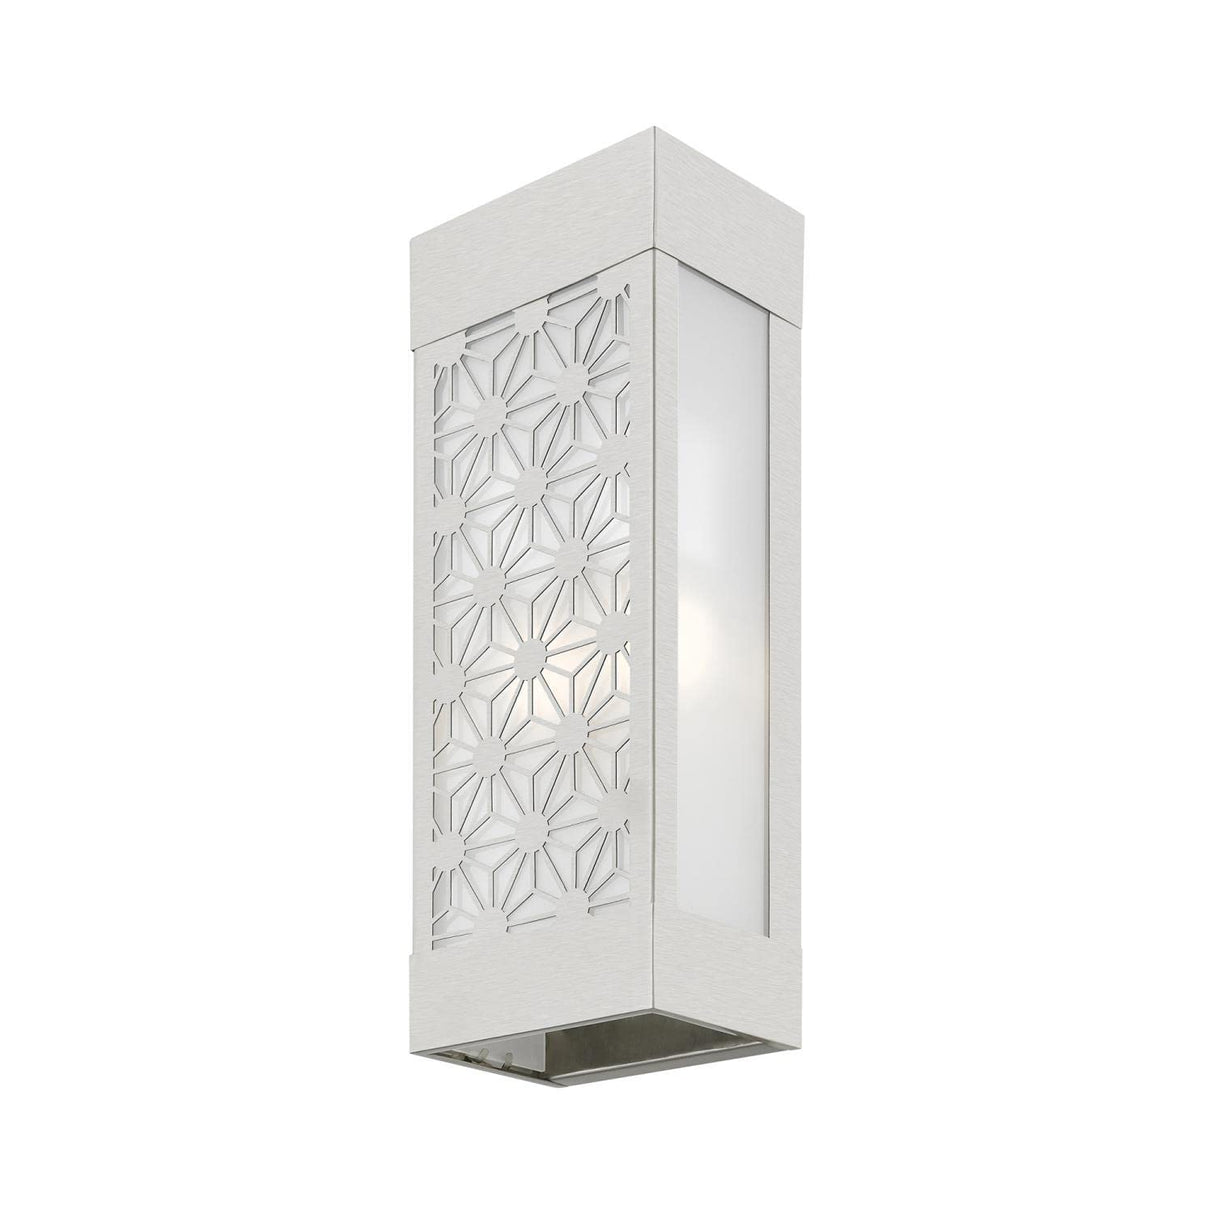 Livex Lighting 24322-91 Berkeley - 2 Light Outdoor ADA Wall Sconce in Nordic Style-17 Inches Tall and 6 Inches Wide, Finish Color: Brushed Nickel